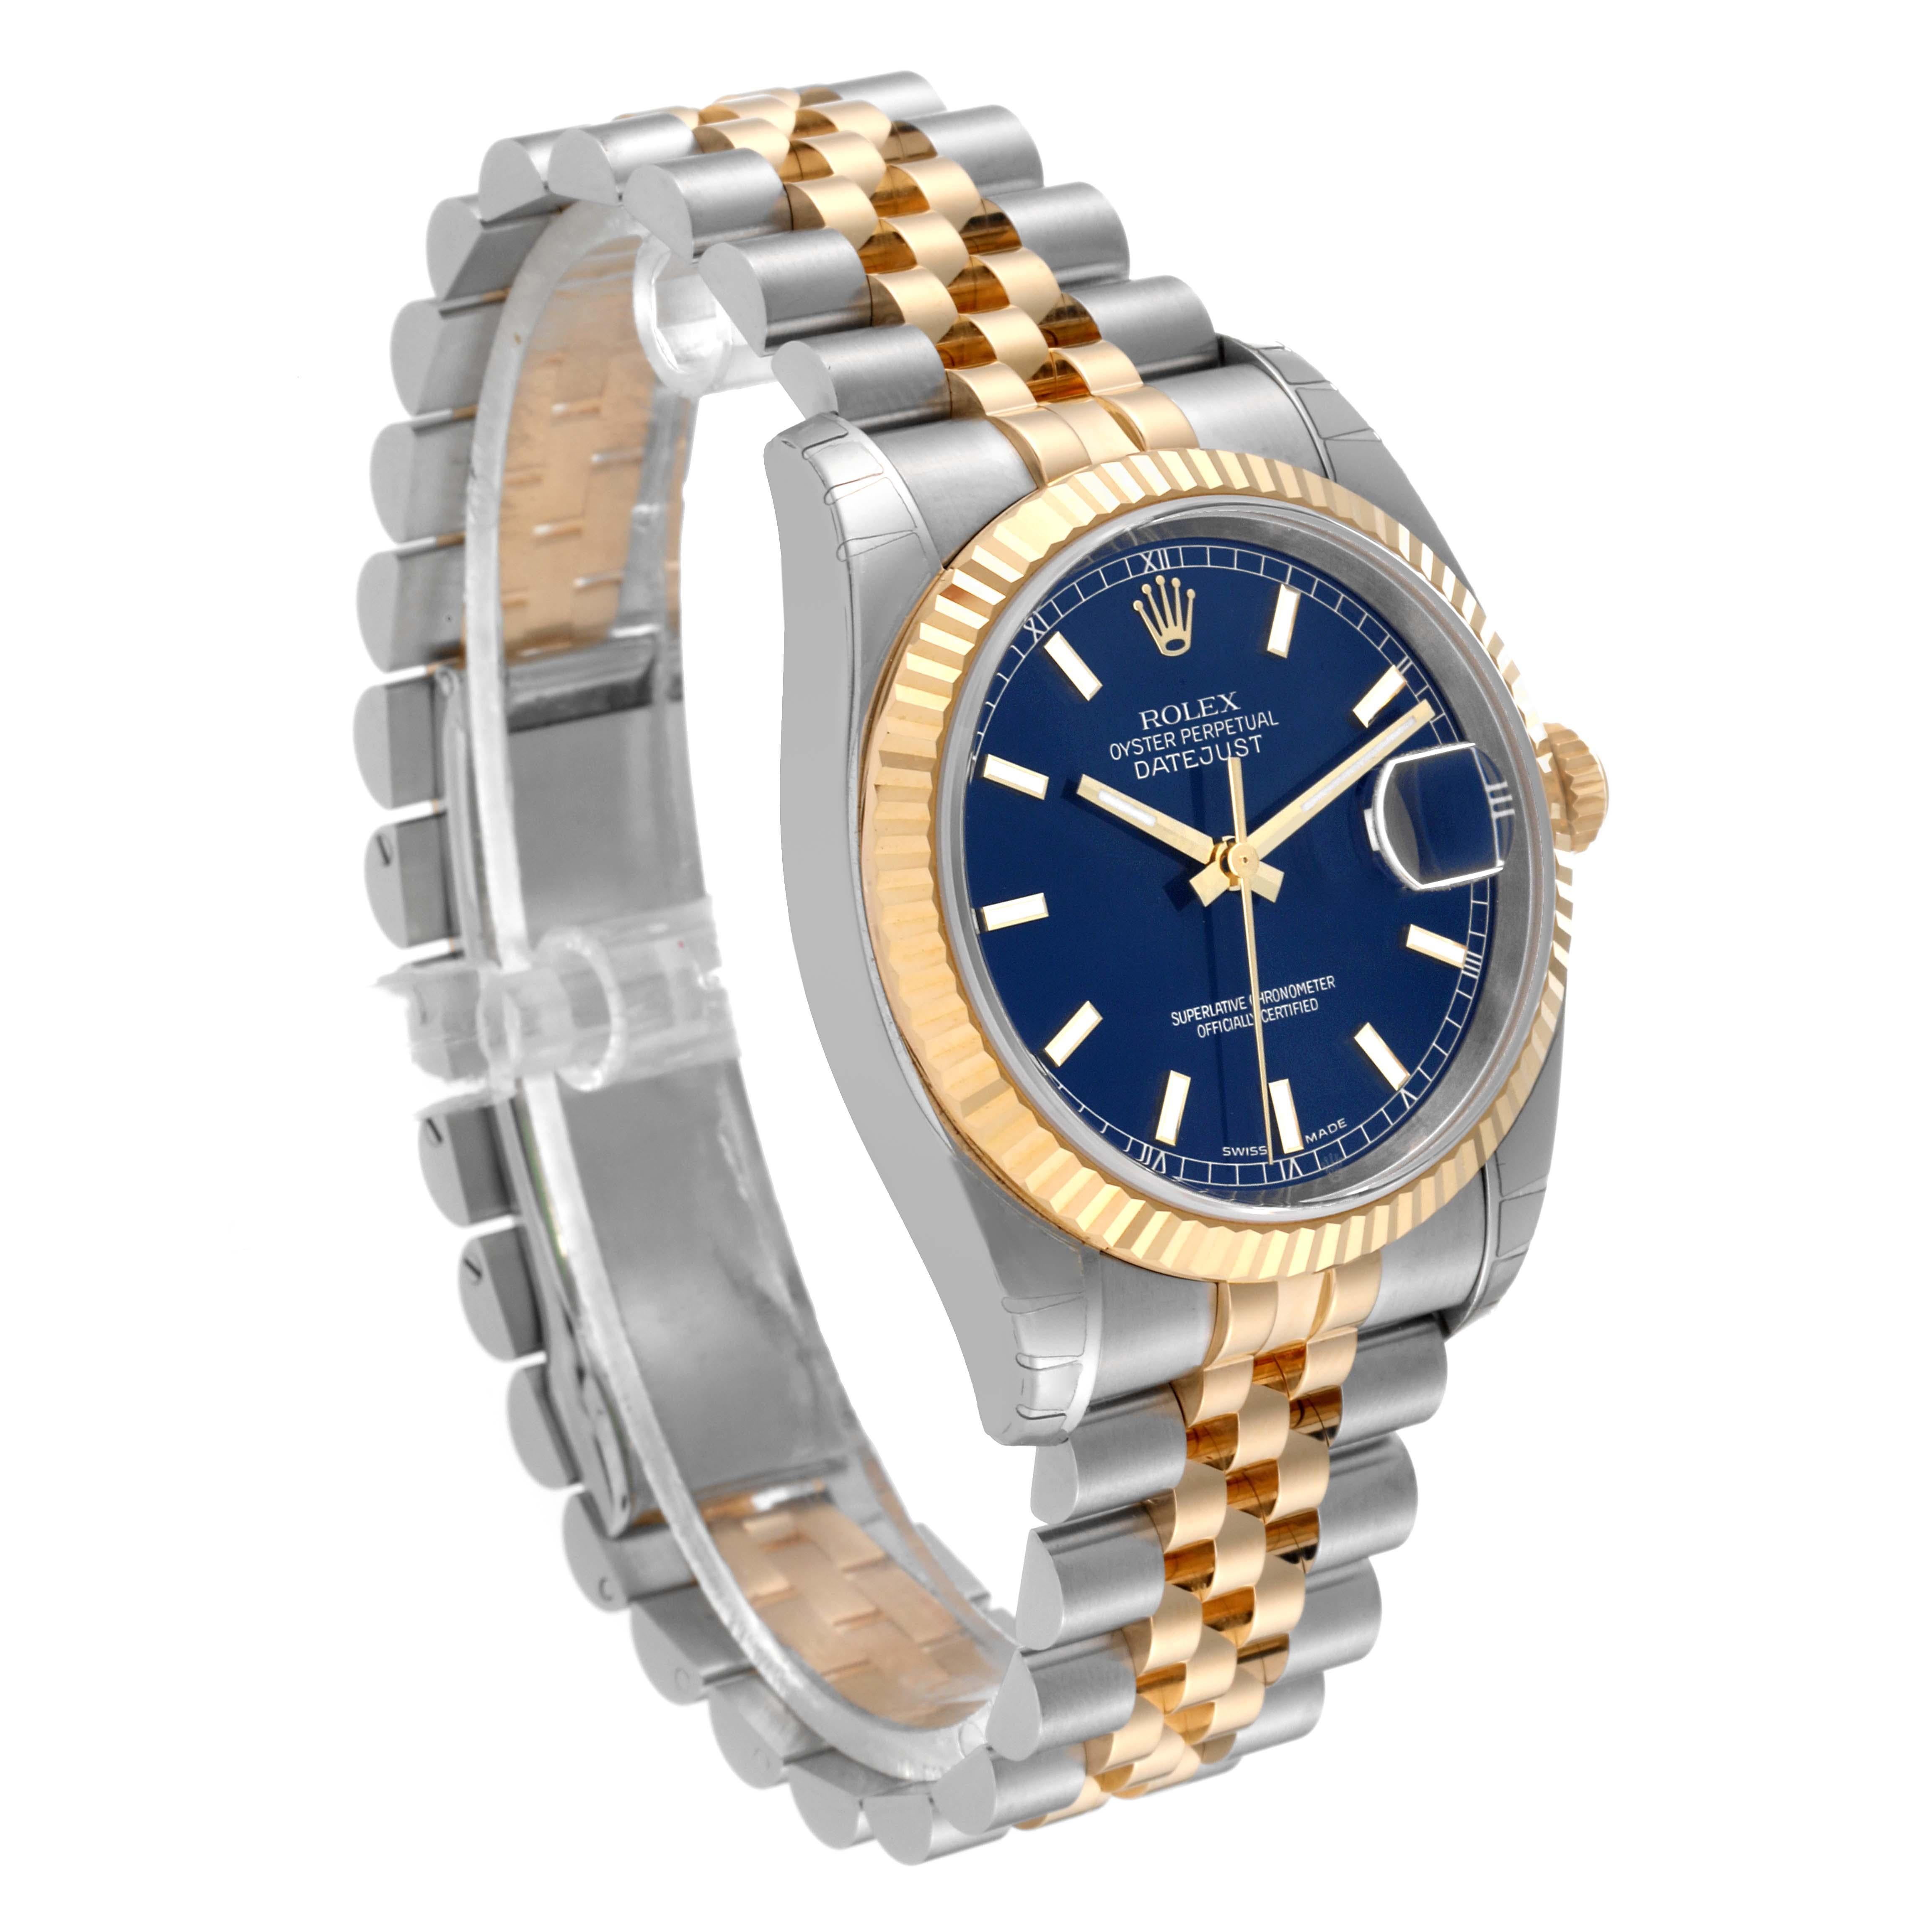 Rolex Datejust Steel Yellow Gold Blue Dial Mens Watch 116233 Box Papers 8